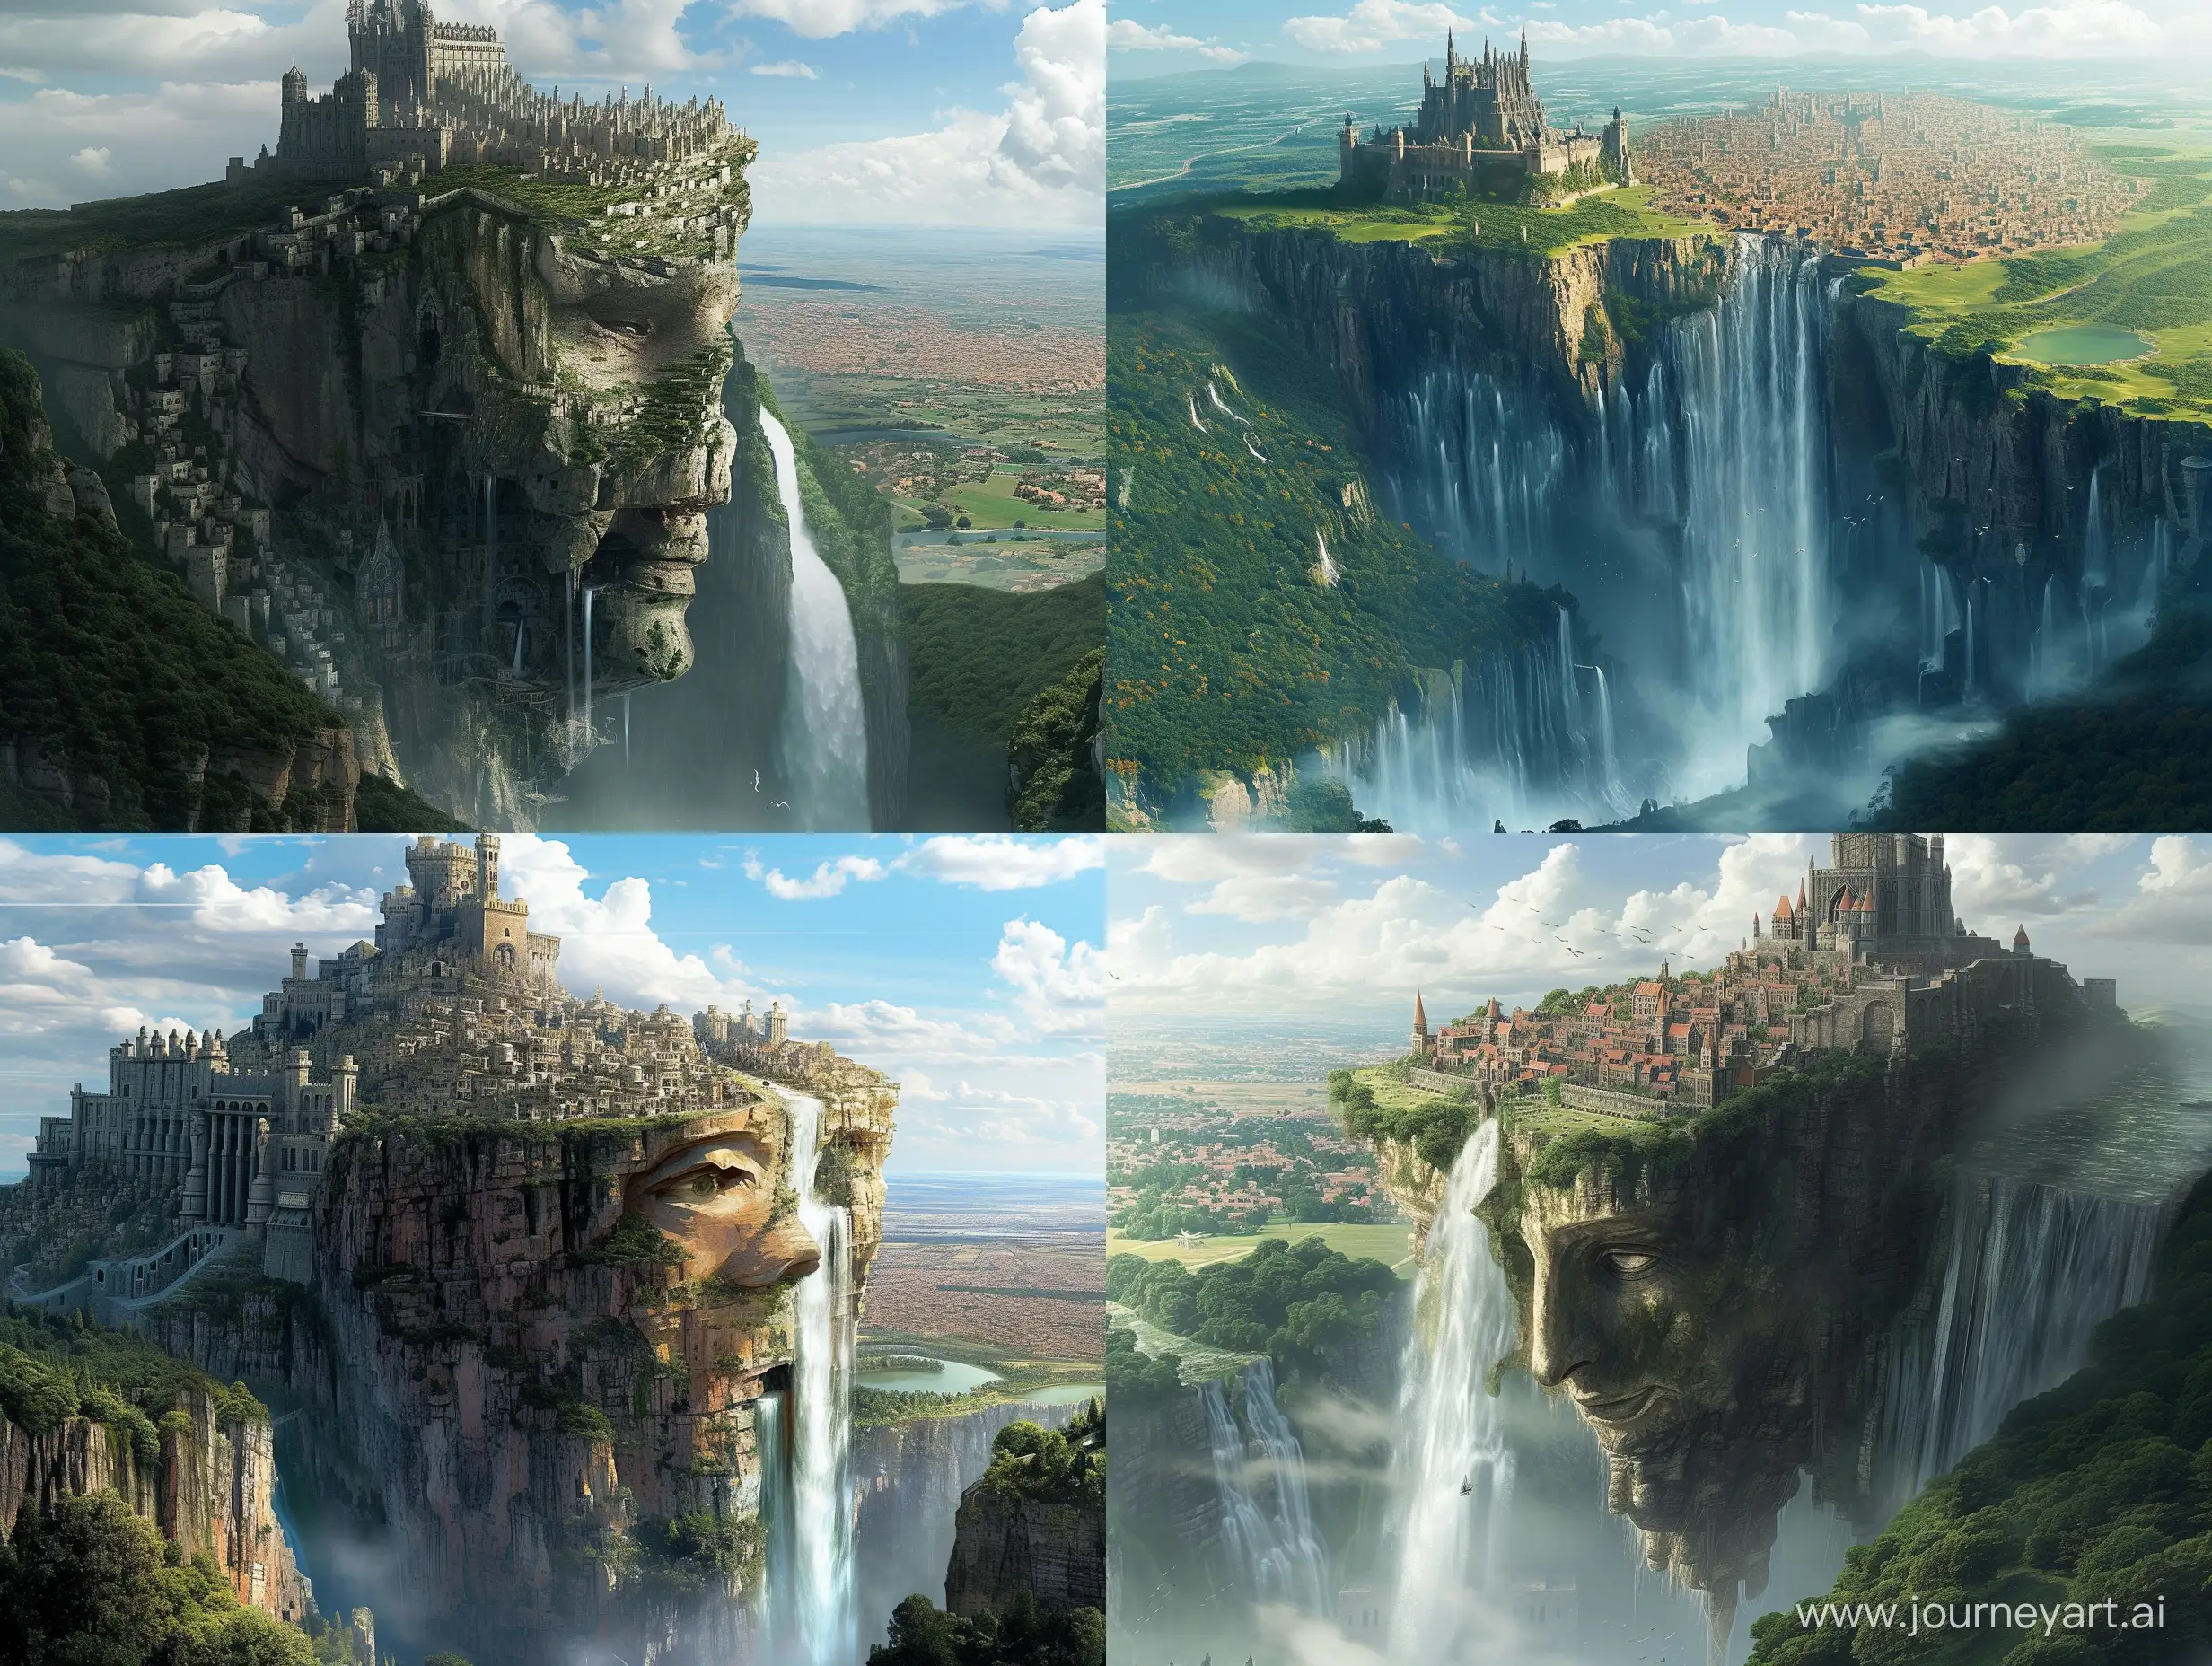 a large fantasy city, near a plateau with a sheer cliff face and a large waterfall, a striking castle and wall on top of the plateau, the city built into the cliff face, a large sprawl of city in the valley below, coniferous forests surrounding the city, a large lake at the bottom of the waterfall